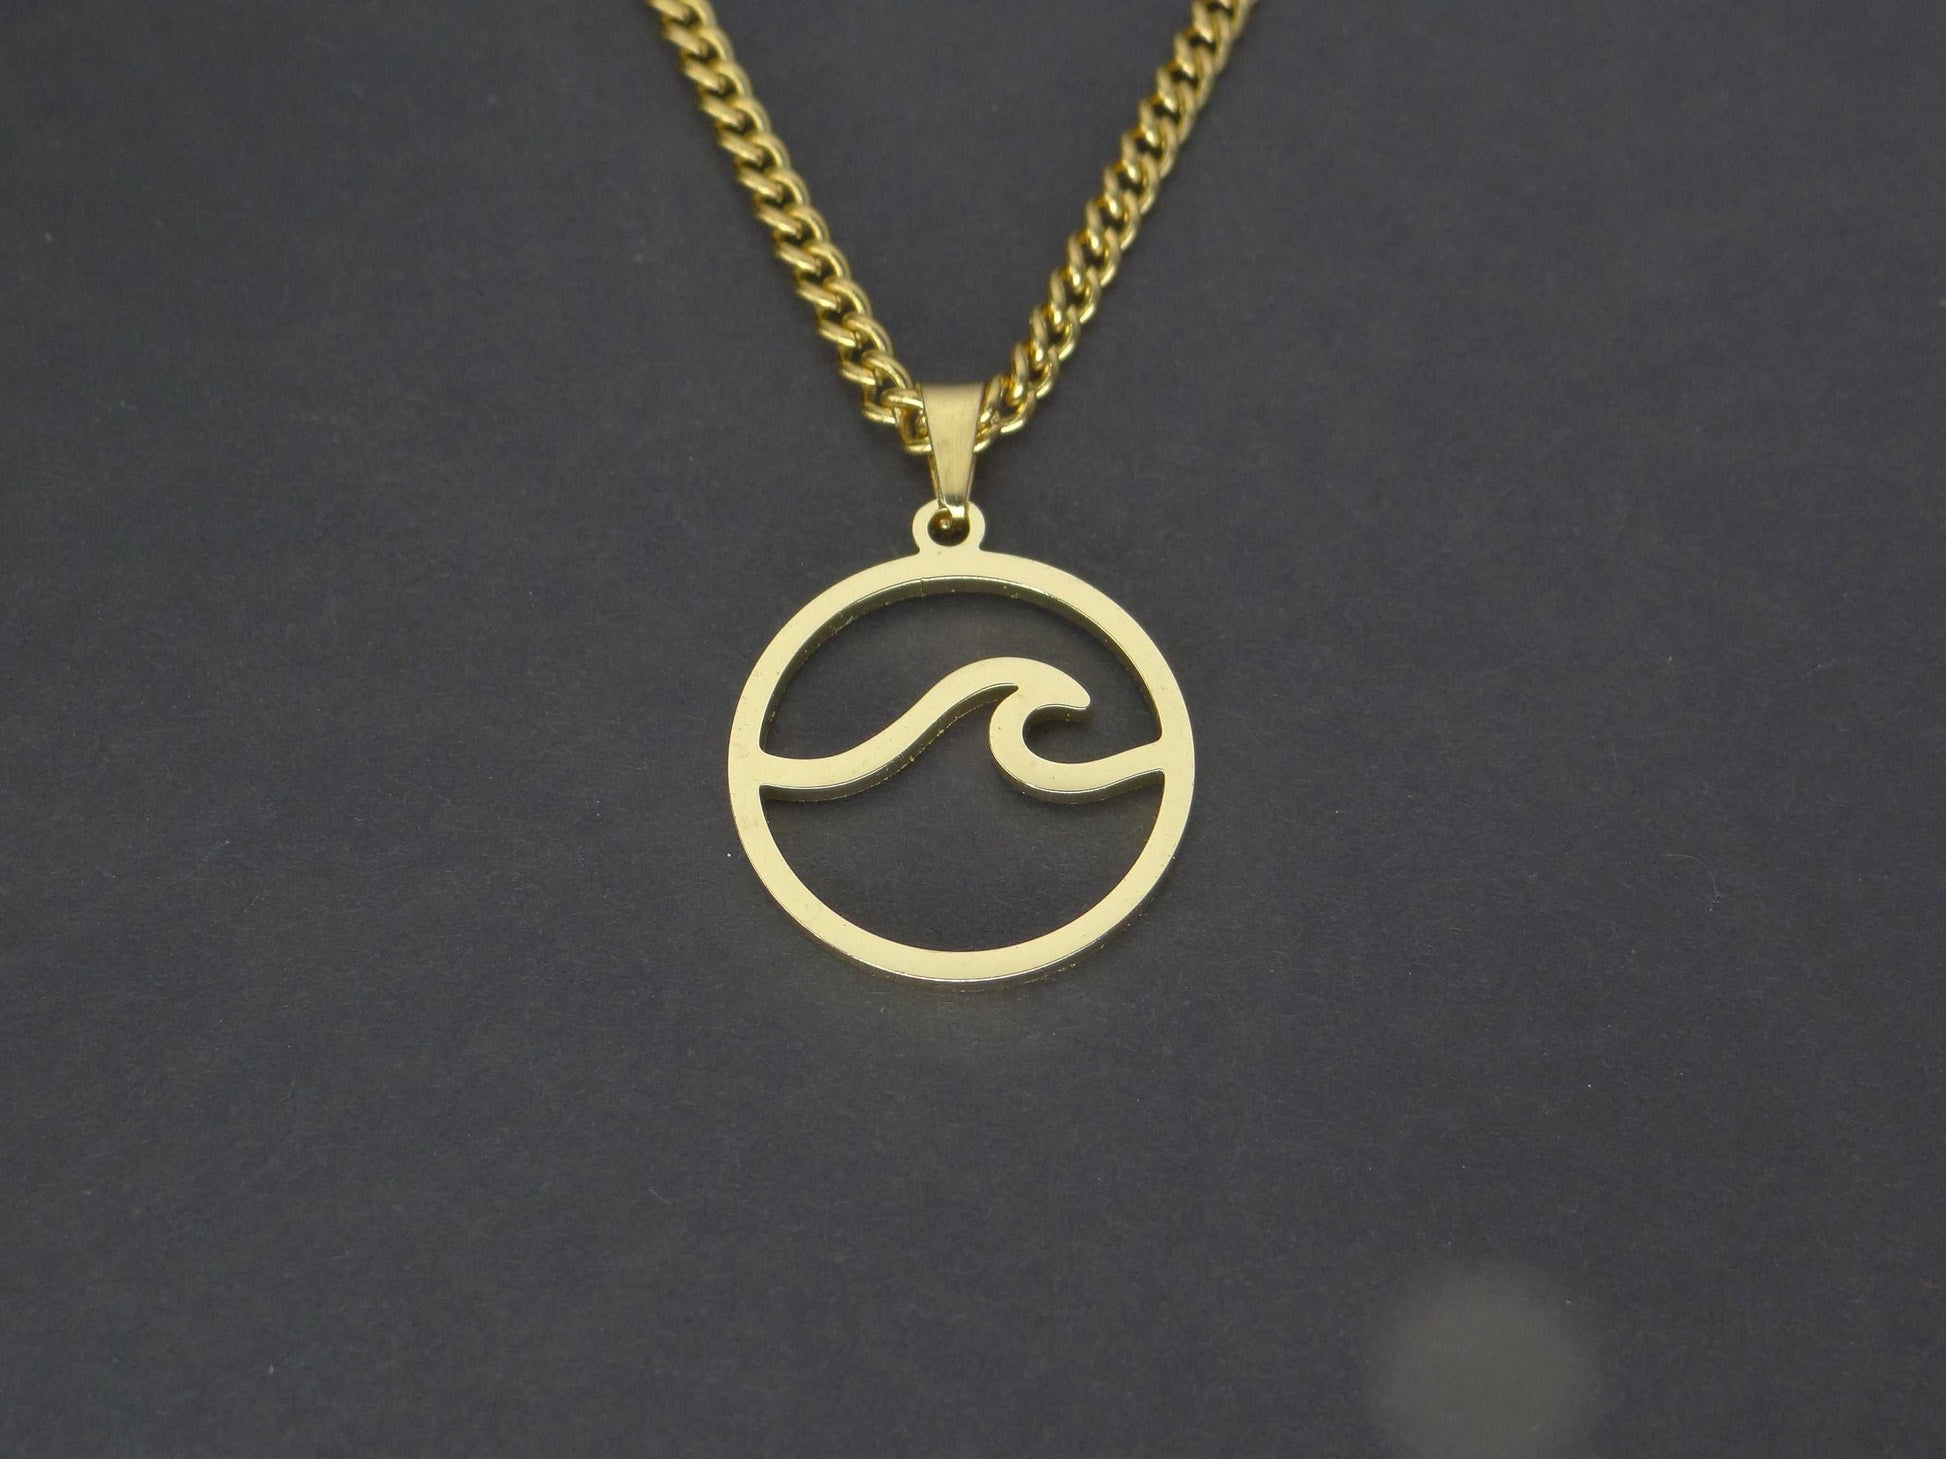 CRW The Great Wave Necklace with 1.8mm curb link chain in gold - Sea Life Necklace for Women - Surf Necklace for Men - Necklace with Pendant